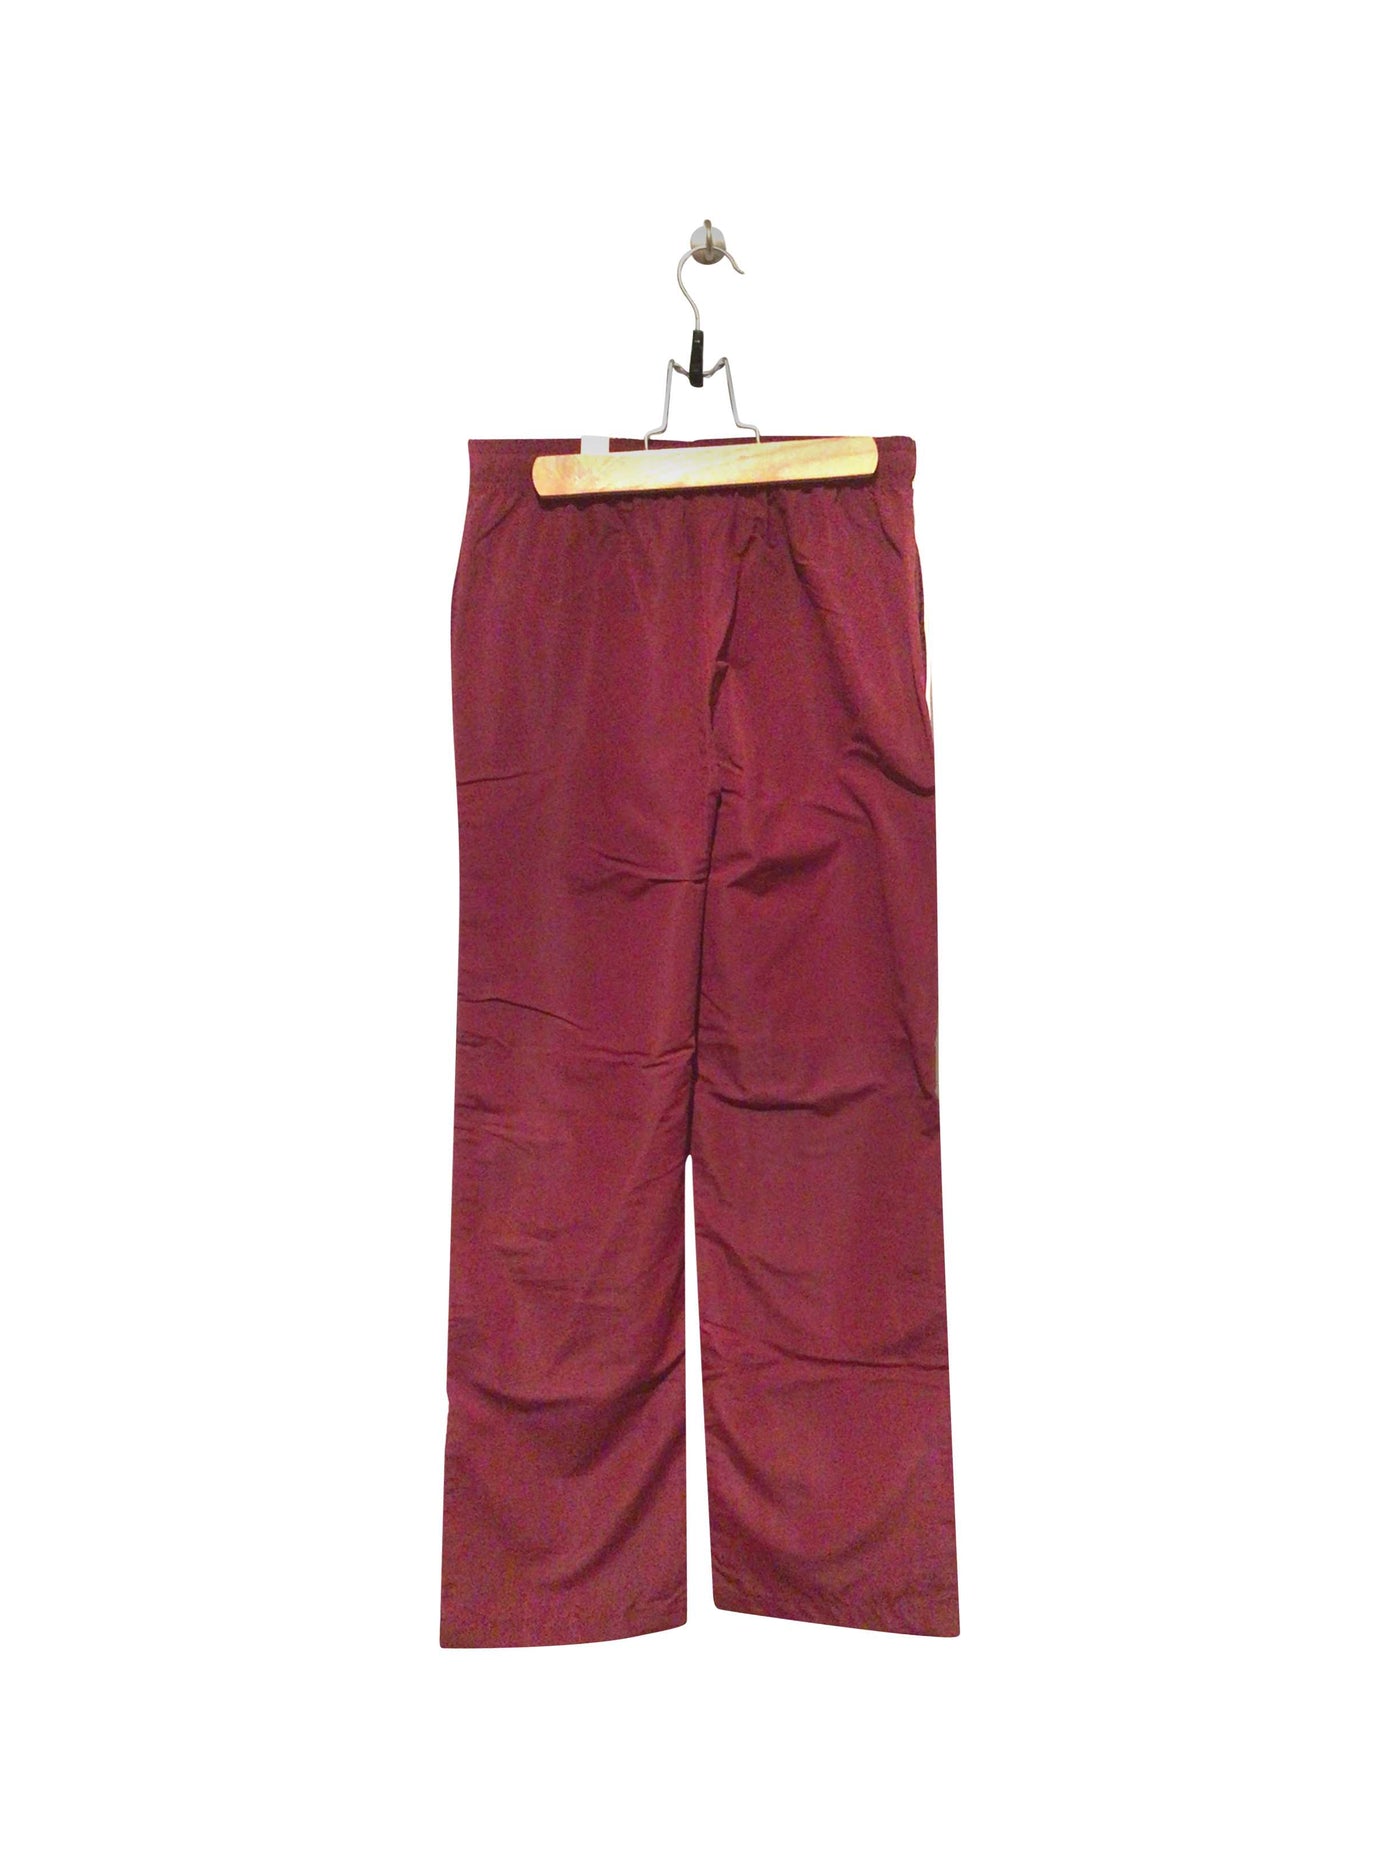 THE CHILDREN'S PLACE Regular fit Pant in Red  -  L